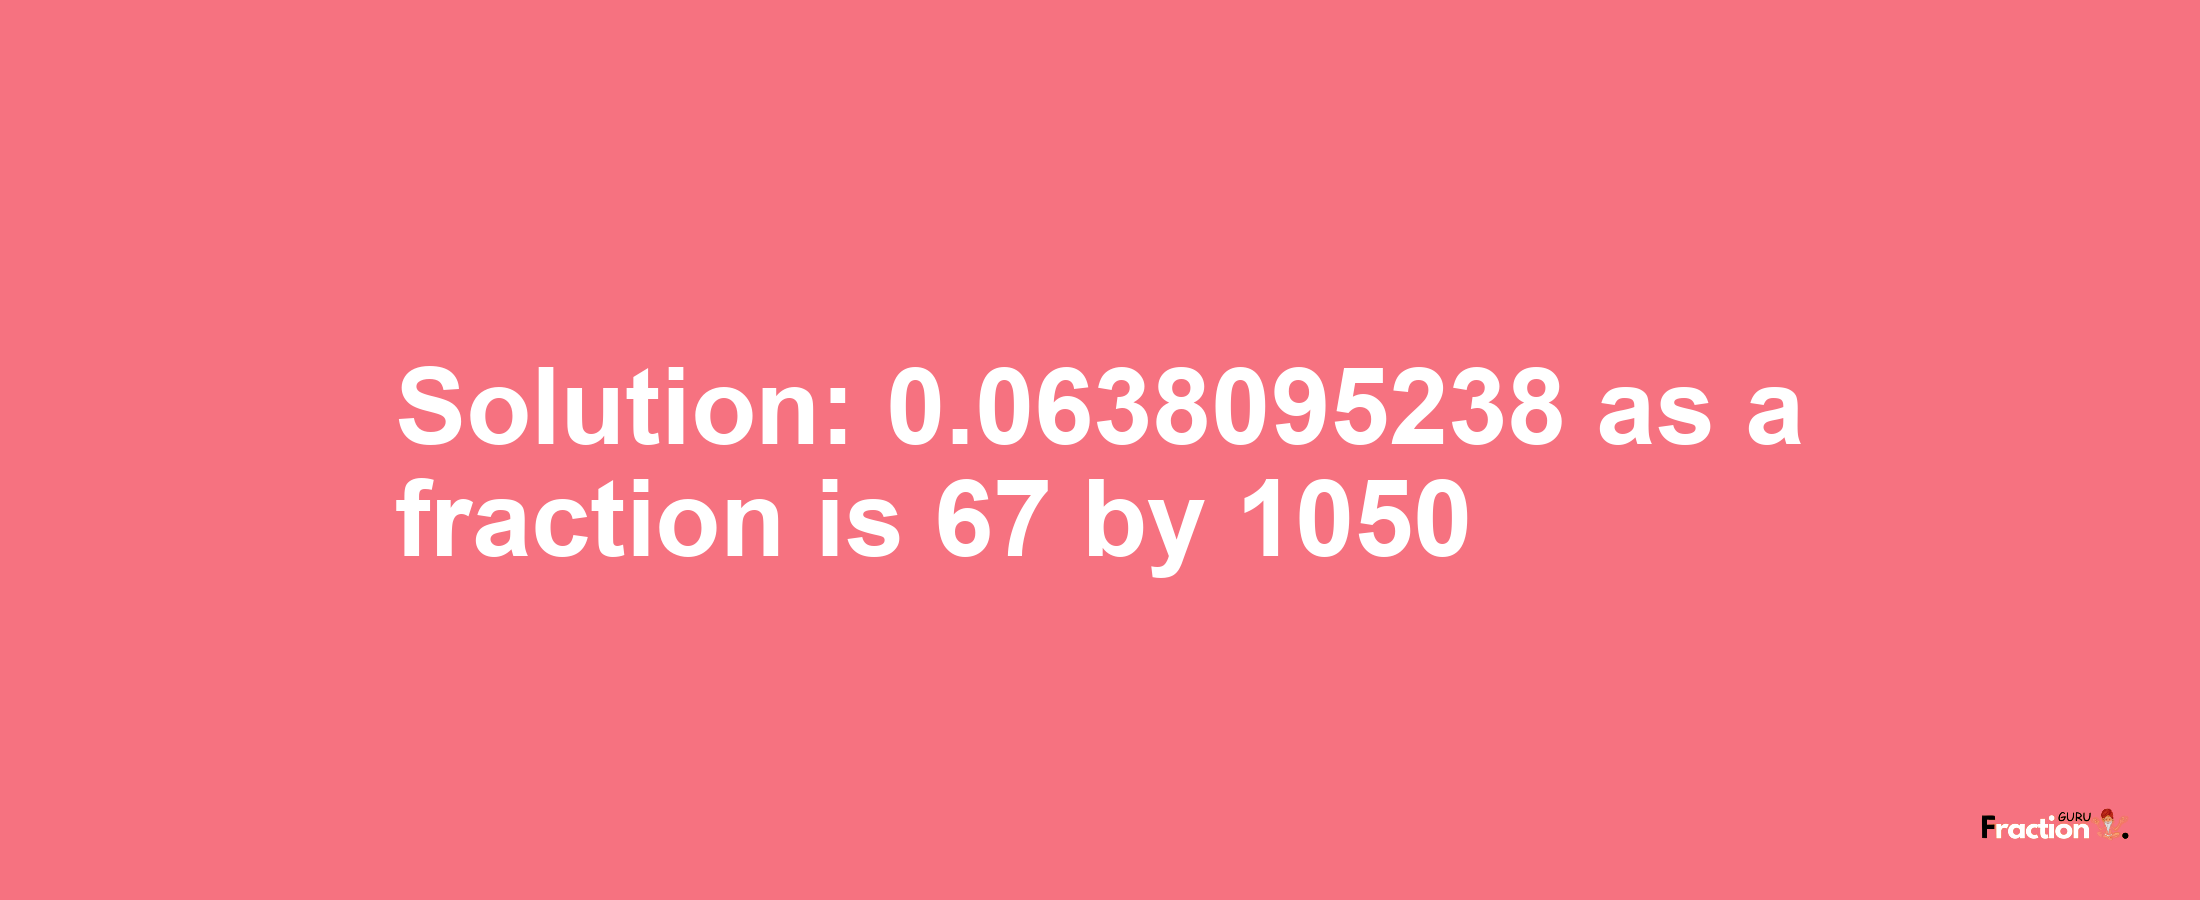 Solution:0.0638095238 as a fraction is 67/1050